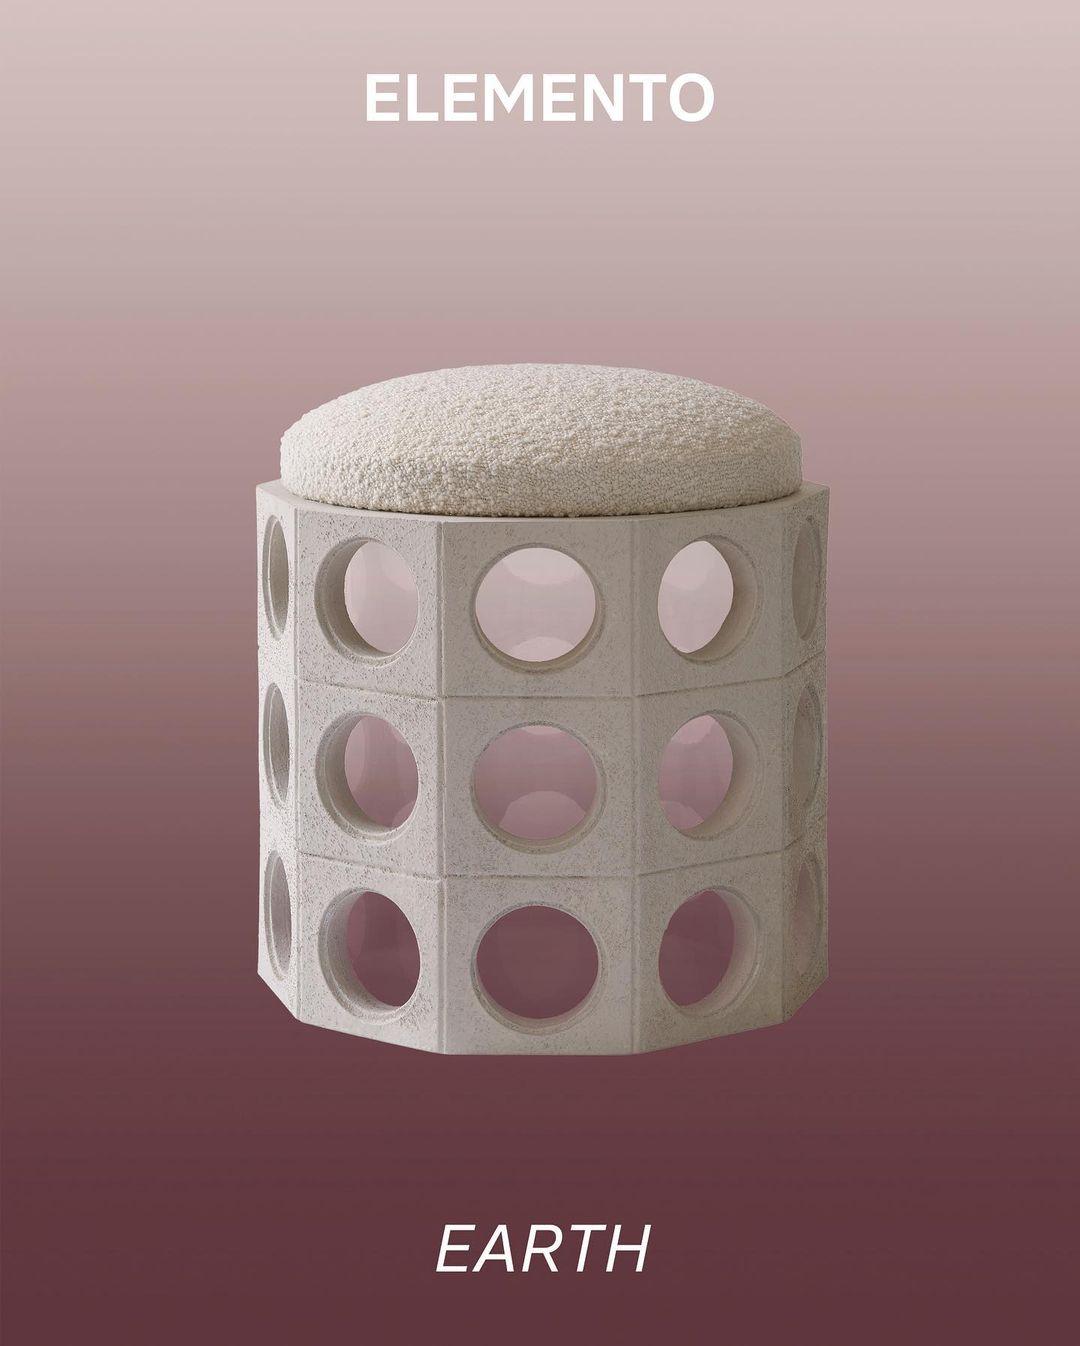 Elemento Pouf earth by Houtique
Materials: upholstery, fabric
Dimensions: D 40 x W 40 x H 46 cm

Designed by Patricia Bustos.
Made in Spain.
Resin structure.
Painted methactylate gradient interior.
(3 color options).

A pouf inspired by